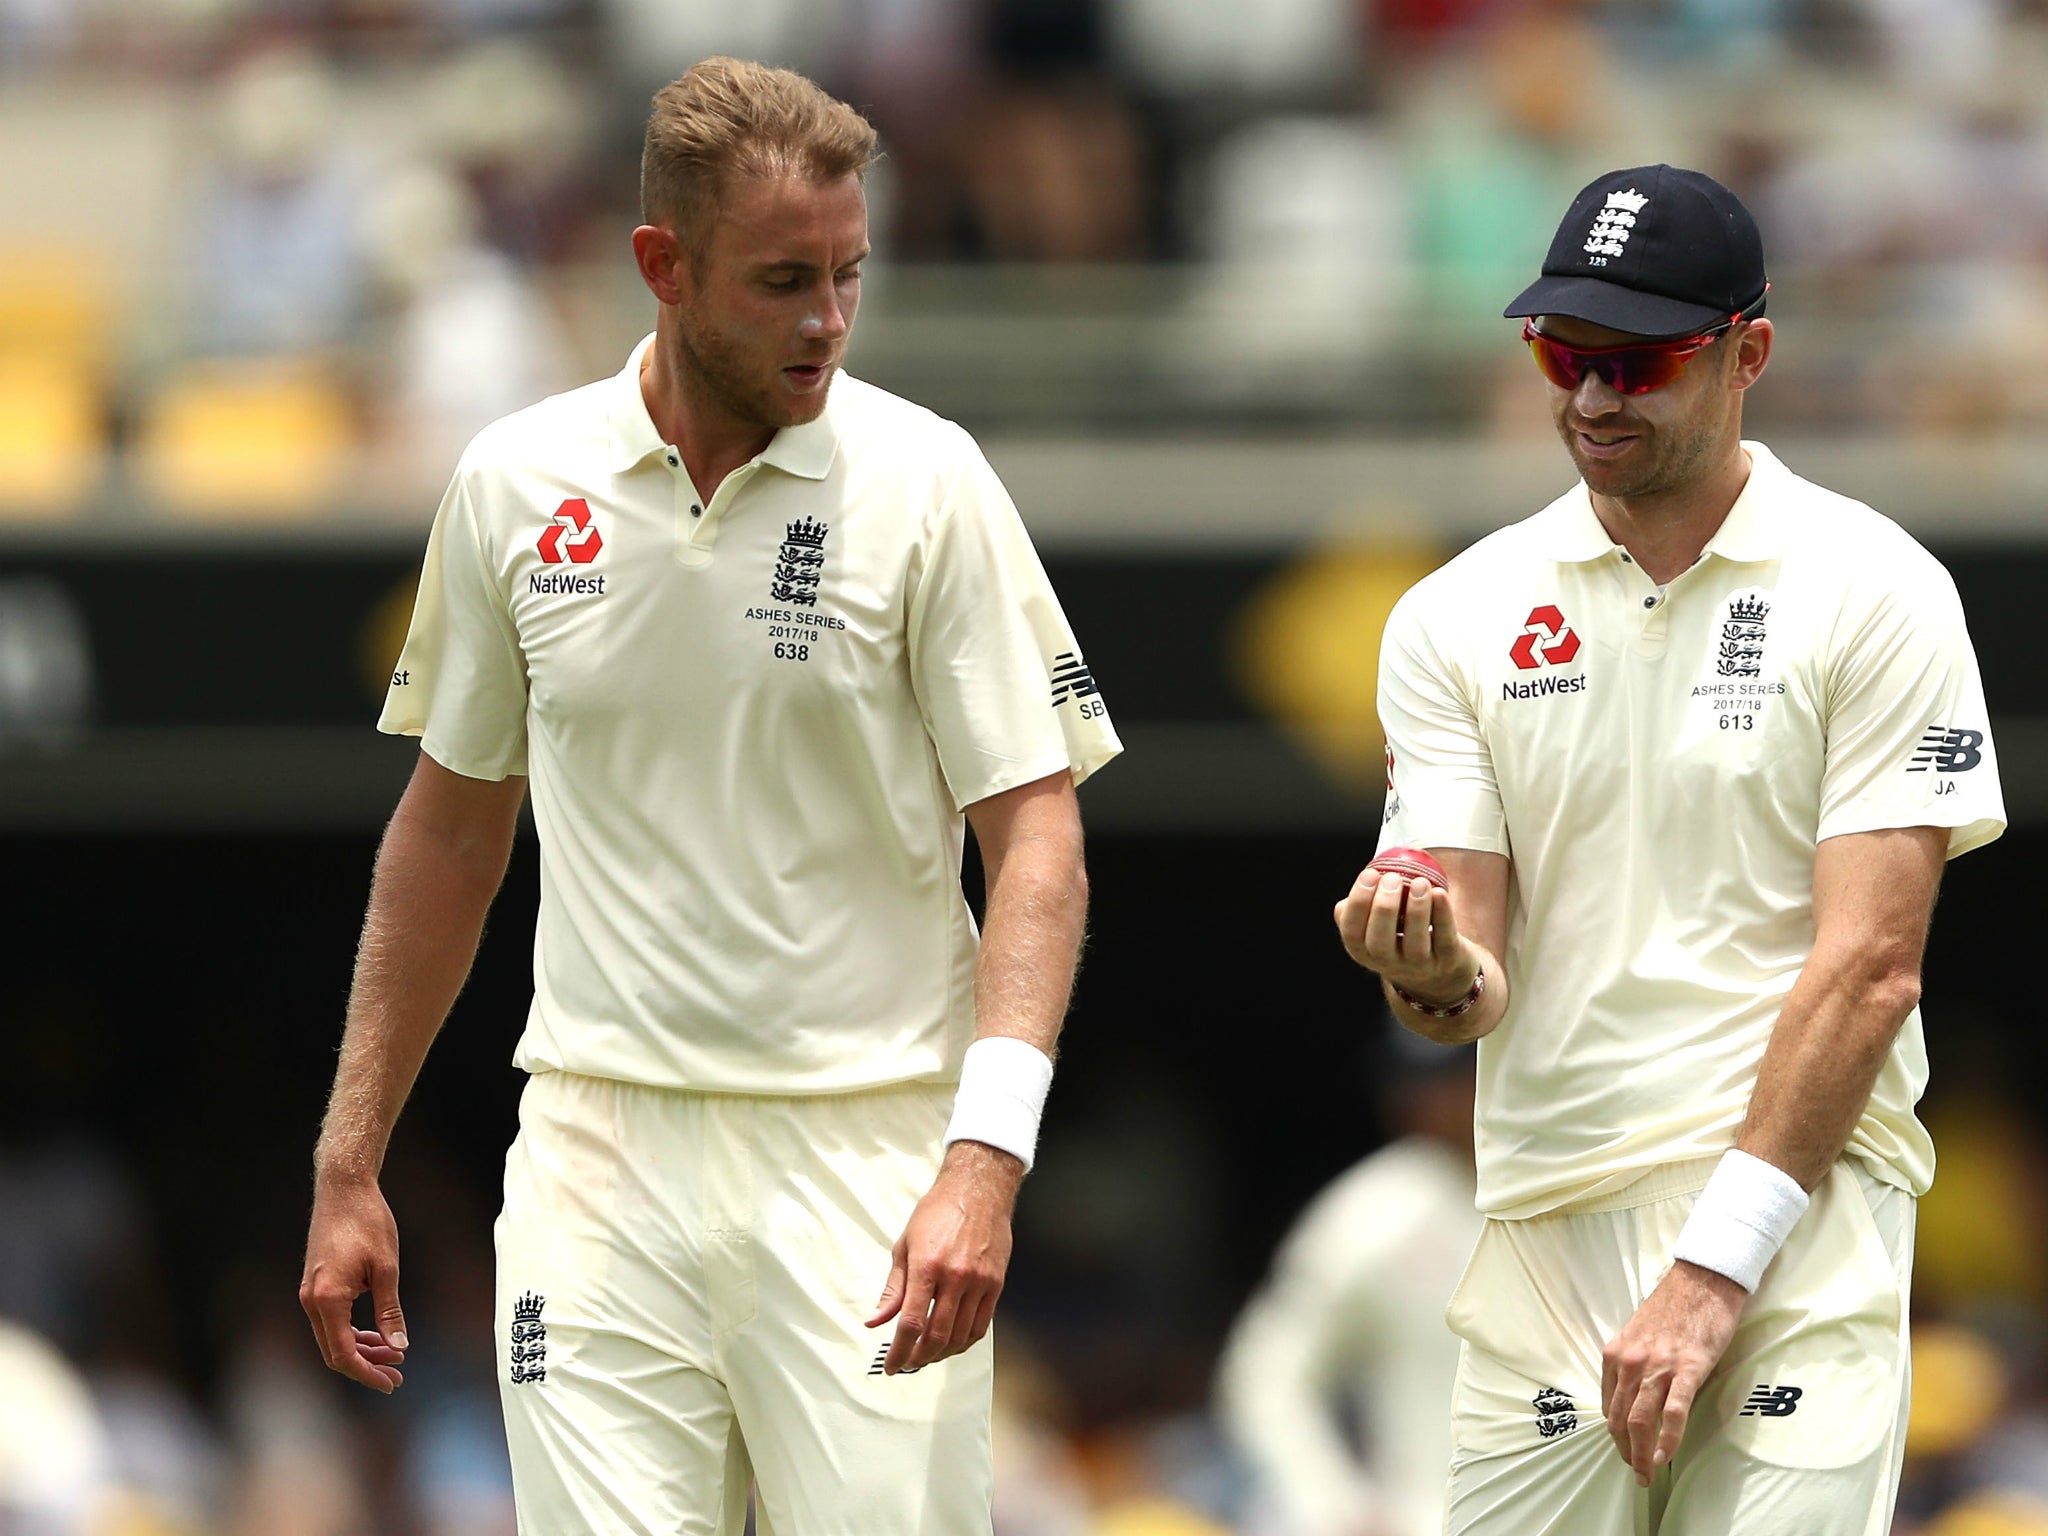 &#13;
Broad and Anderson discuss England's well-laid plans - but are they overplanning? &#13;